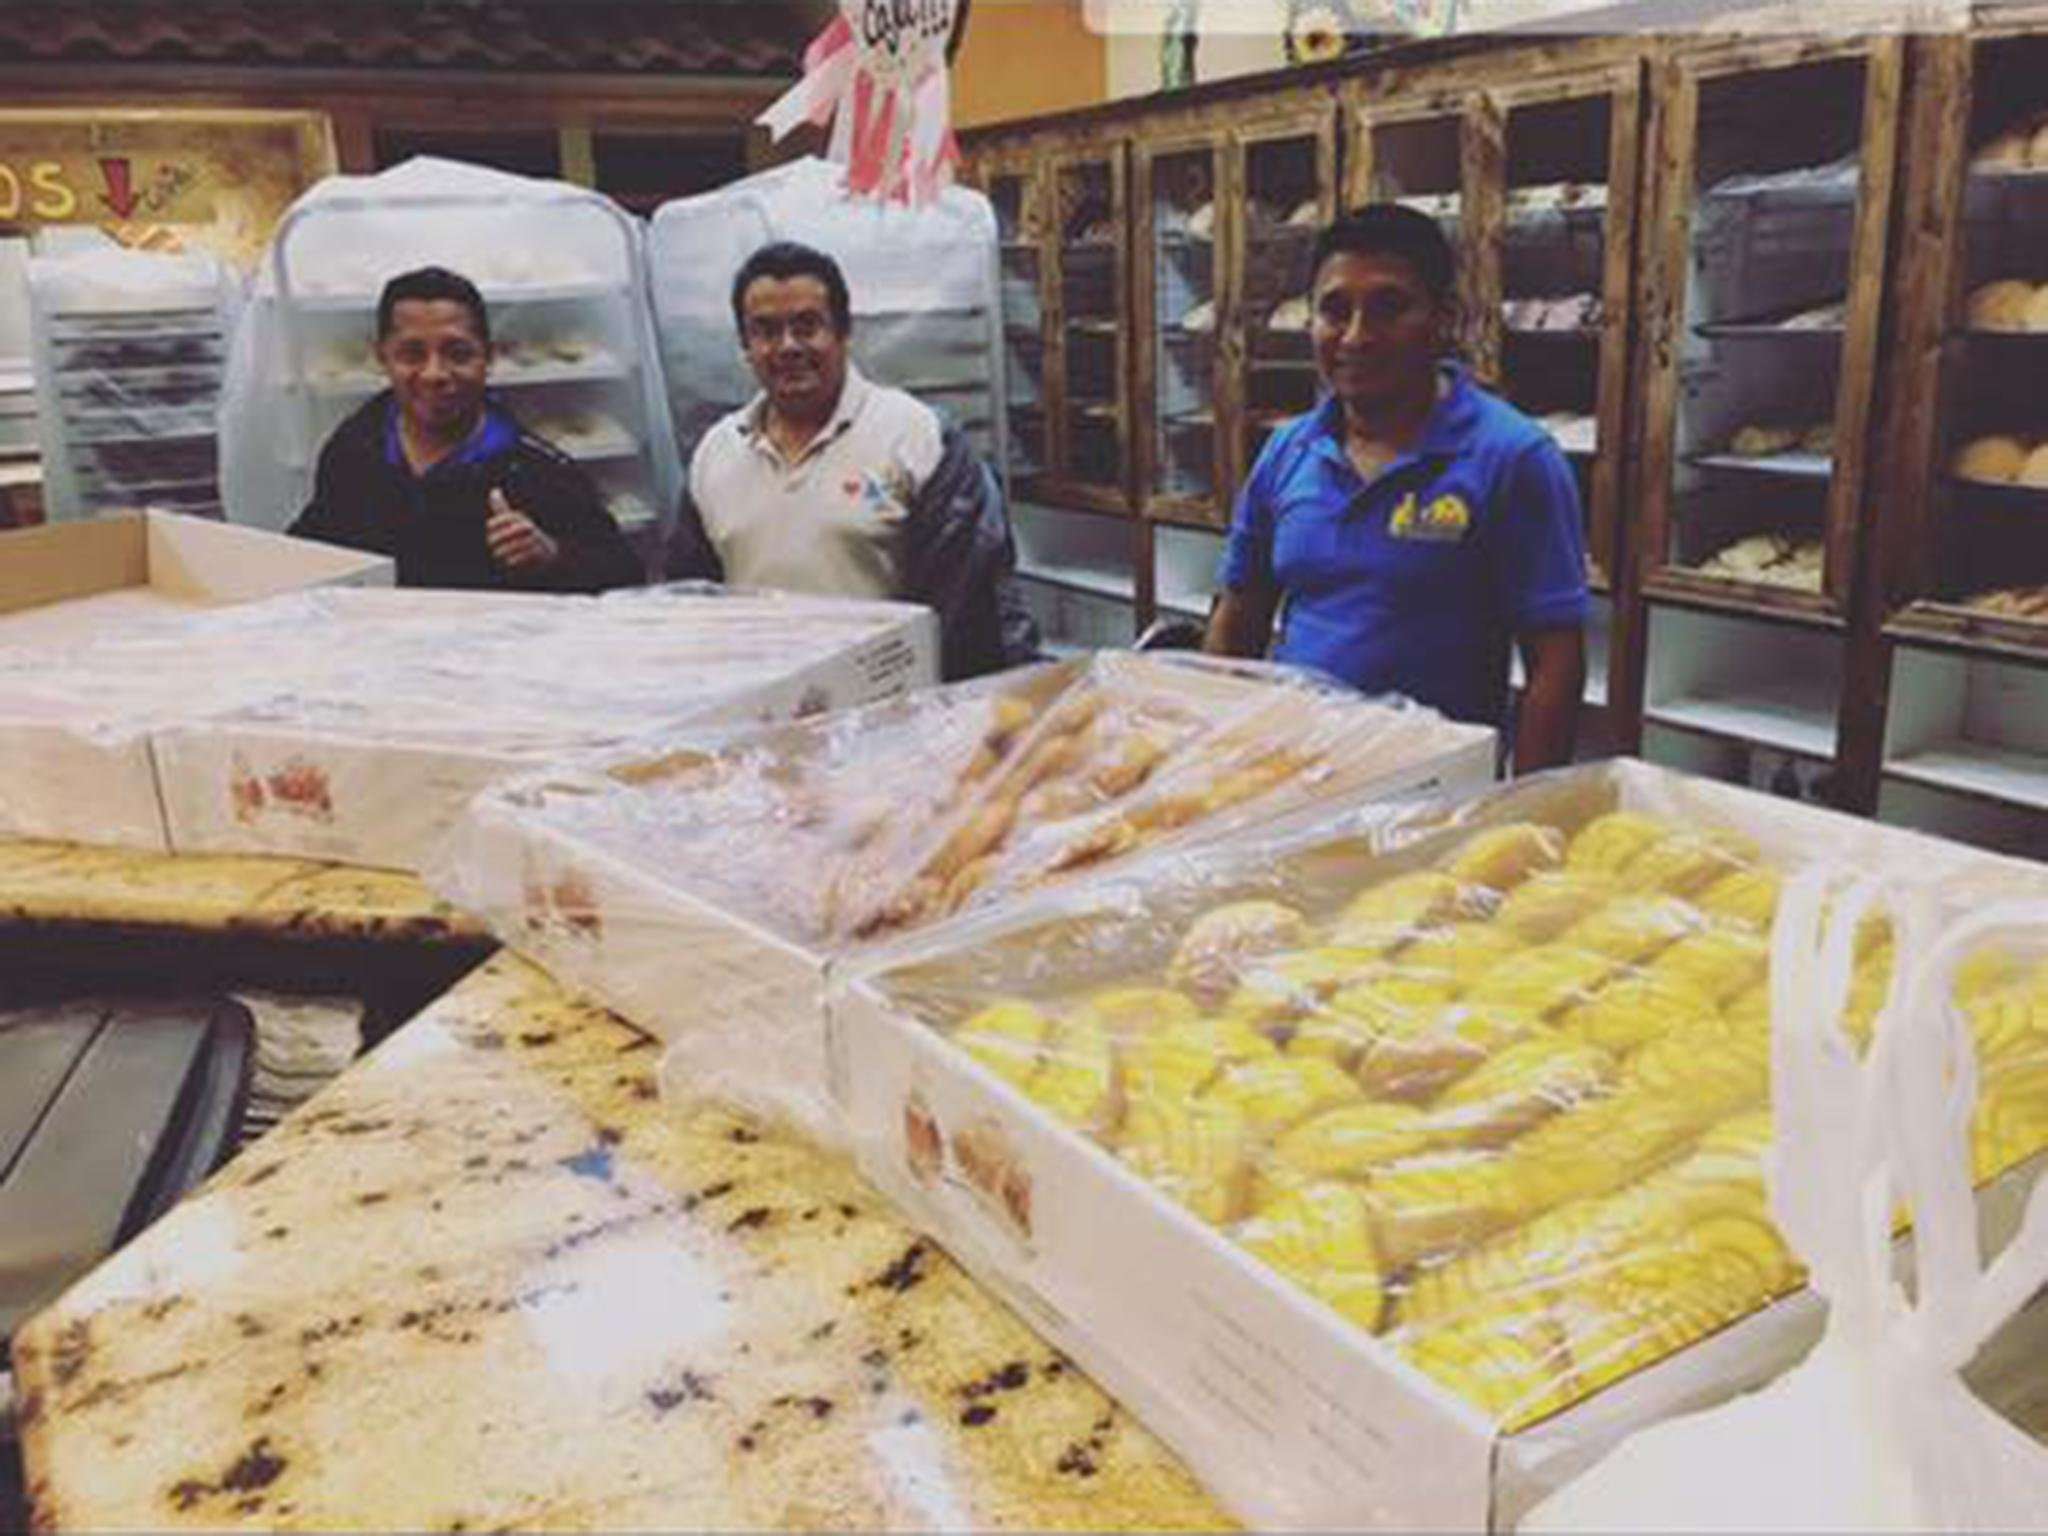 image for Trapped Mexican bakers make pan dulce for hundreds of Harvey victims over two days